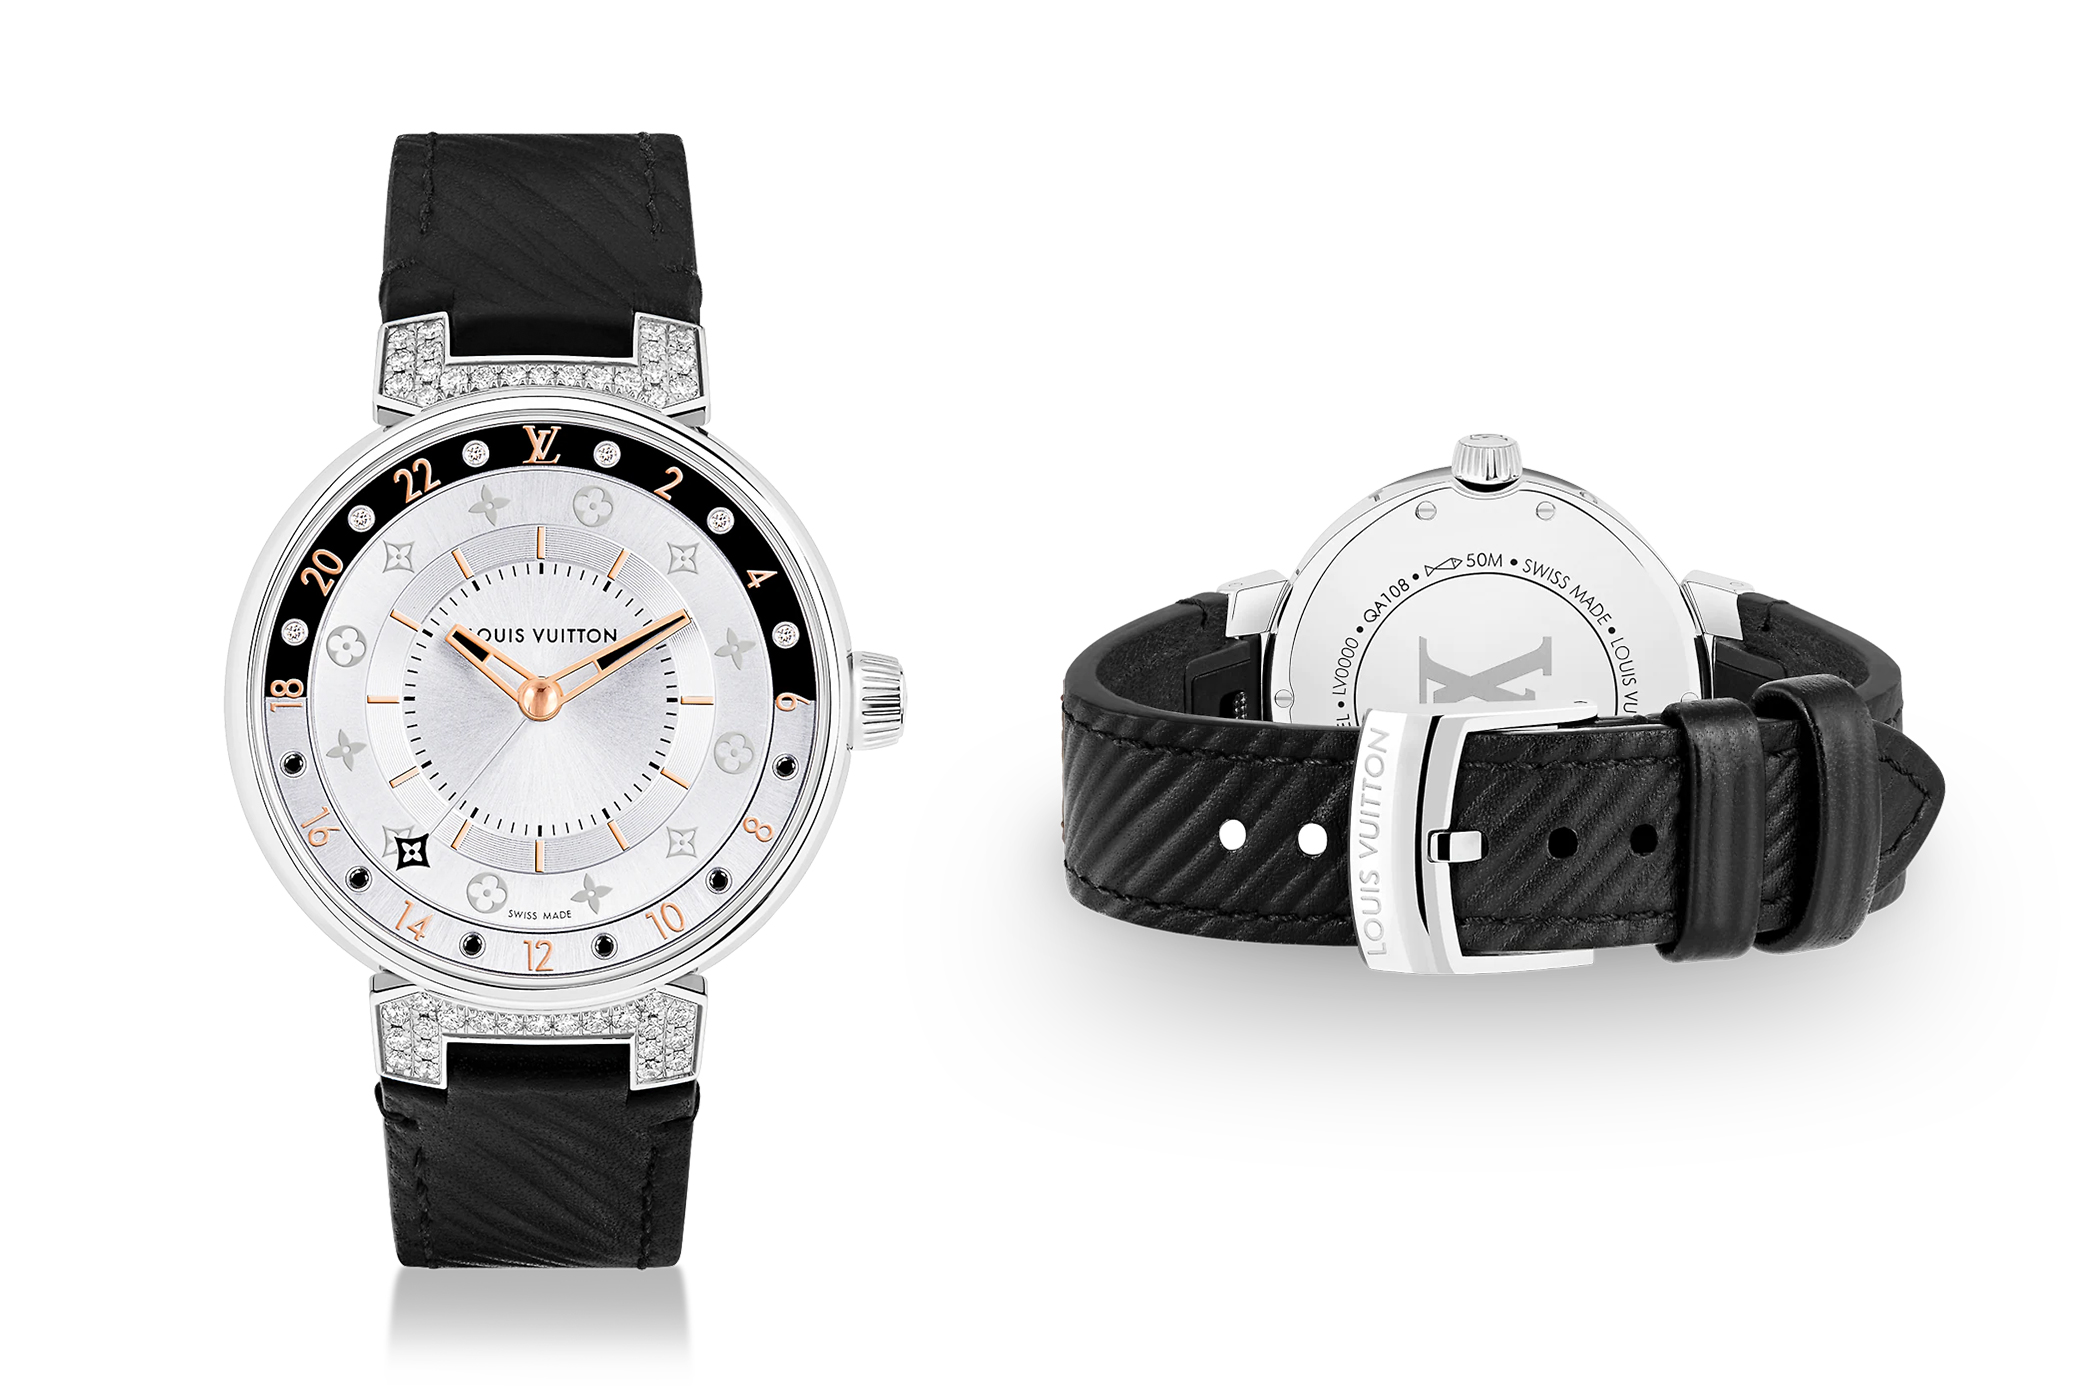 Louis Vuitton - Tambour Moon Dual Time Watch - L'Orologio